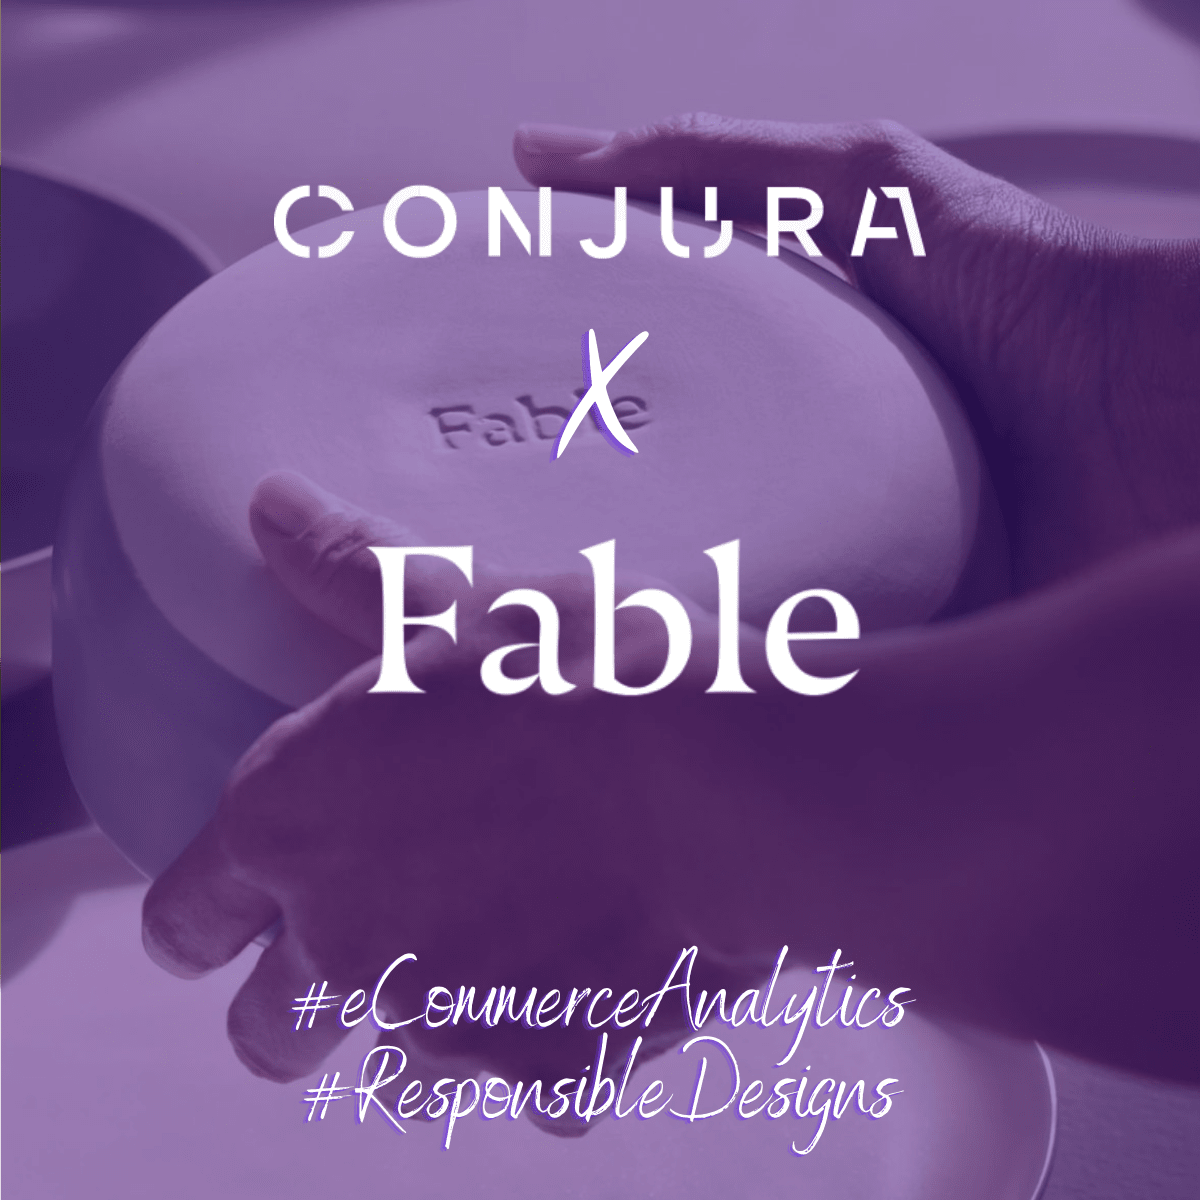 Fable Home Taps Conjura